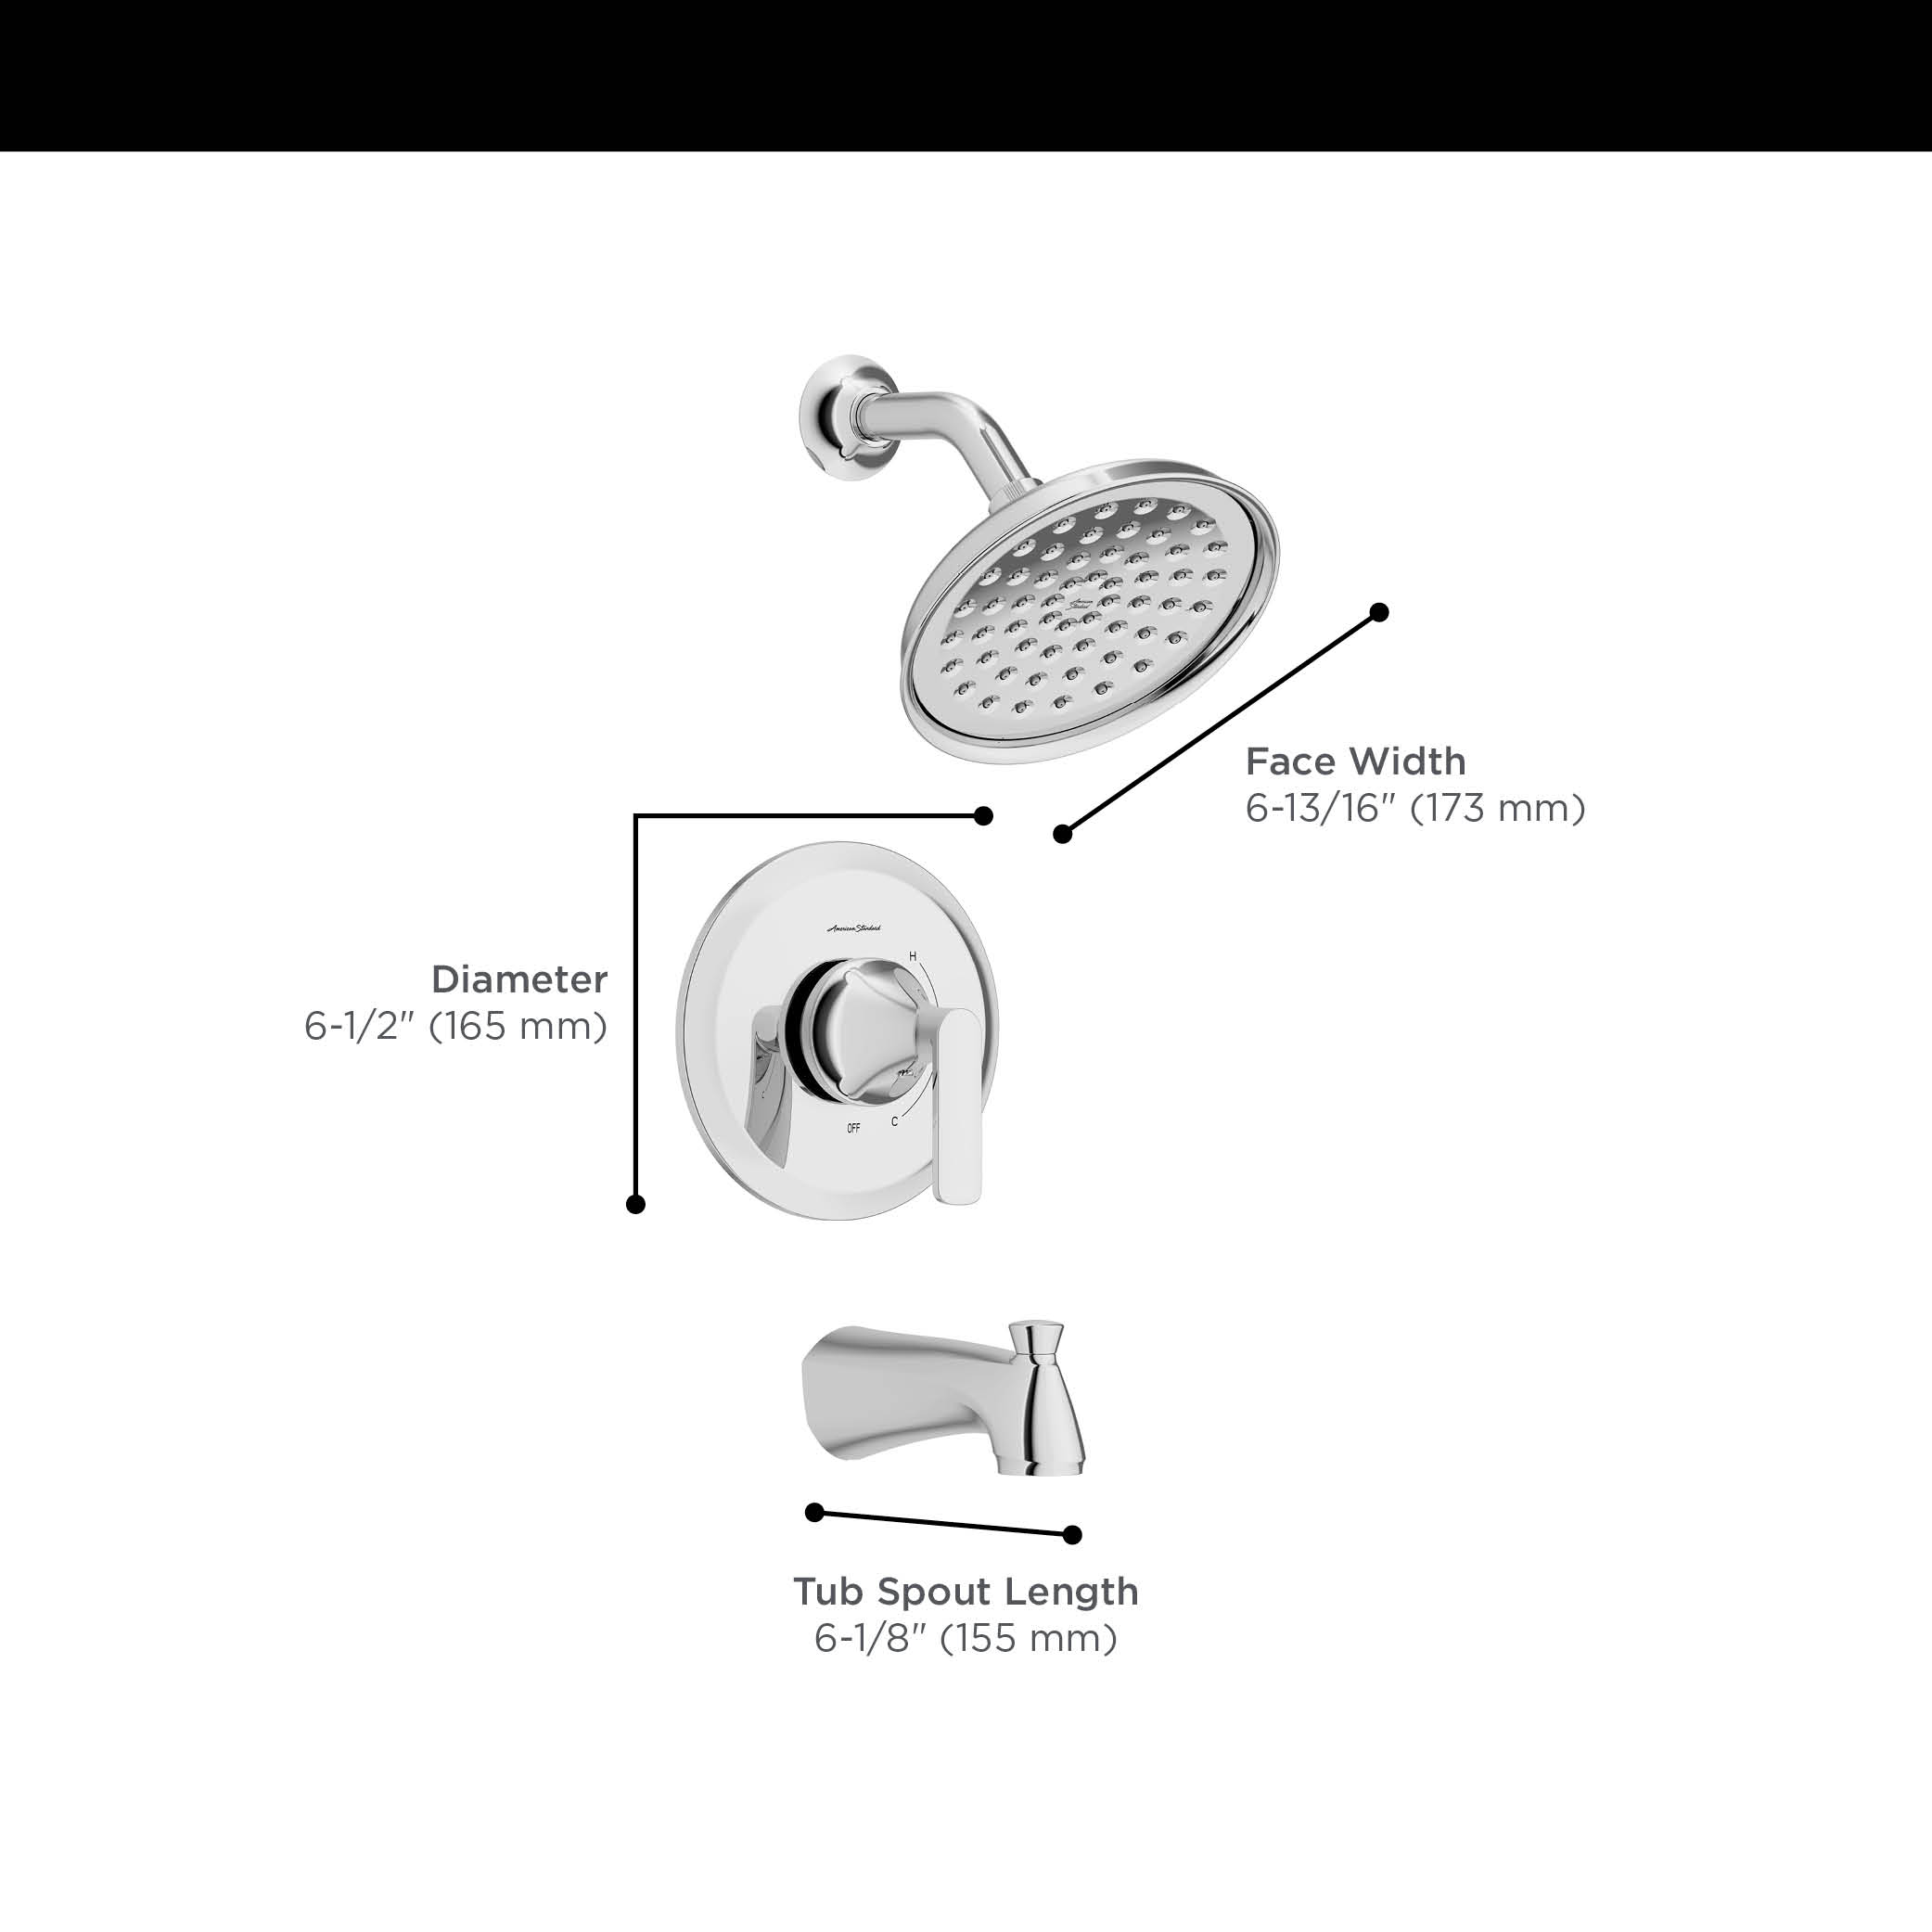 Corsham 1.8 gpm/6.8 L/min Tub and Shower Trim Kit With Water-Saving Showerhead, Double Ceramic Pressure Balance Cartridge With Lever Handle